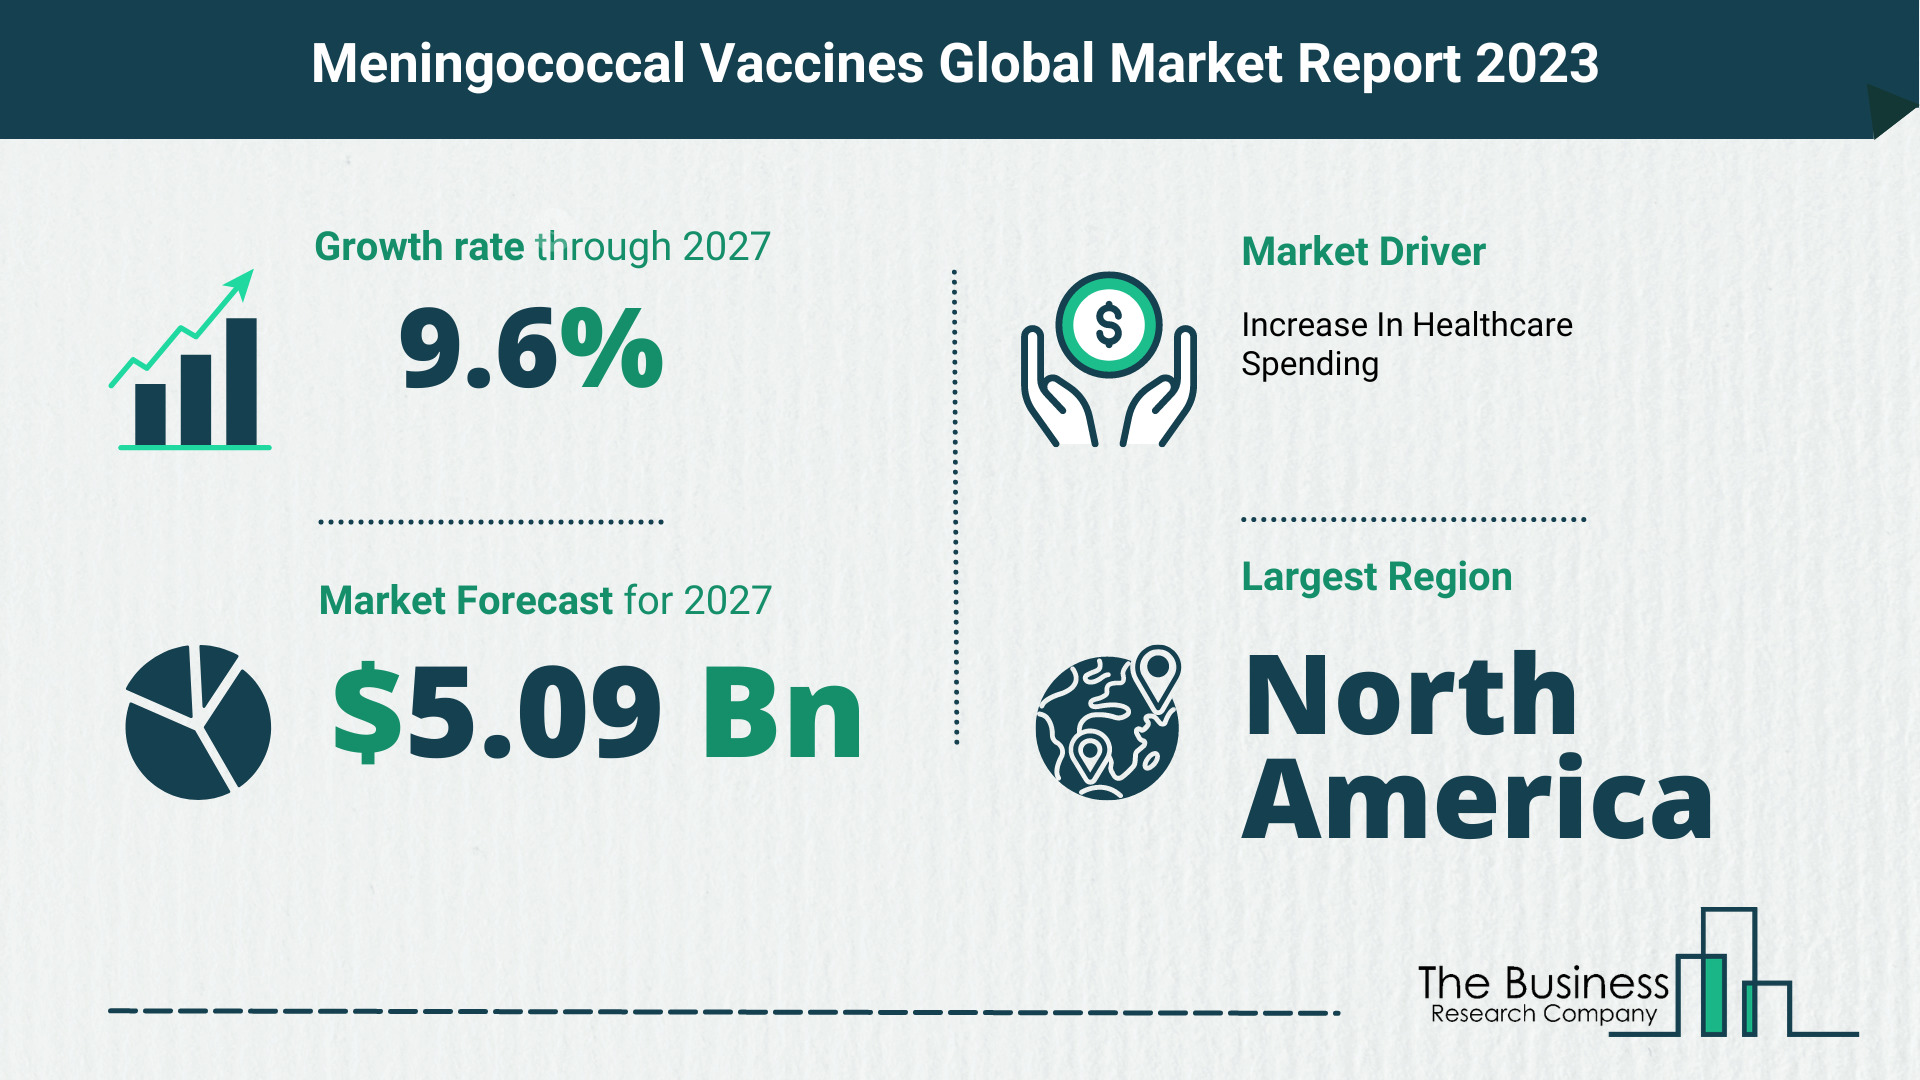 How Will The Meningococcal Vaccines Market Globally Expand In 2023?